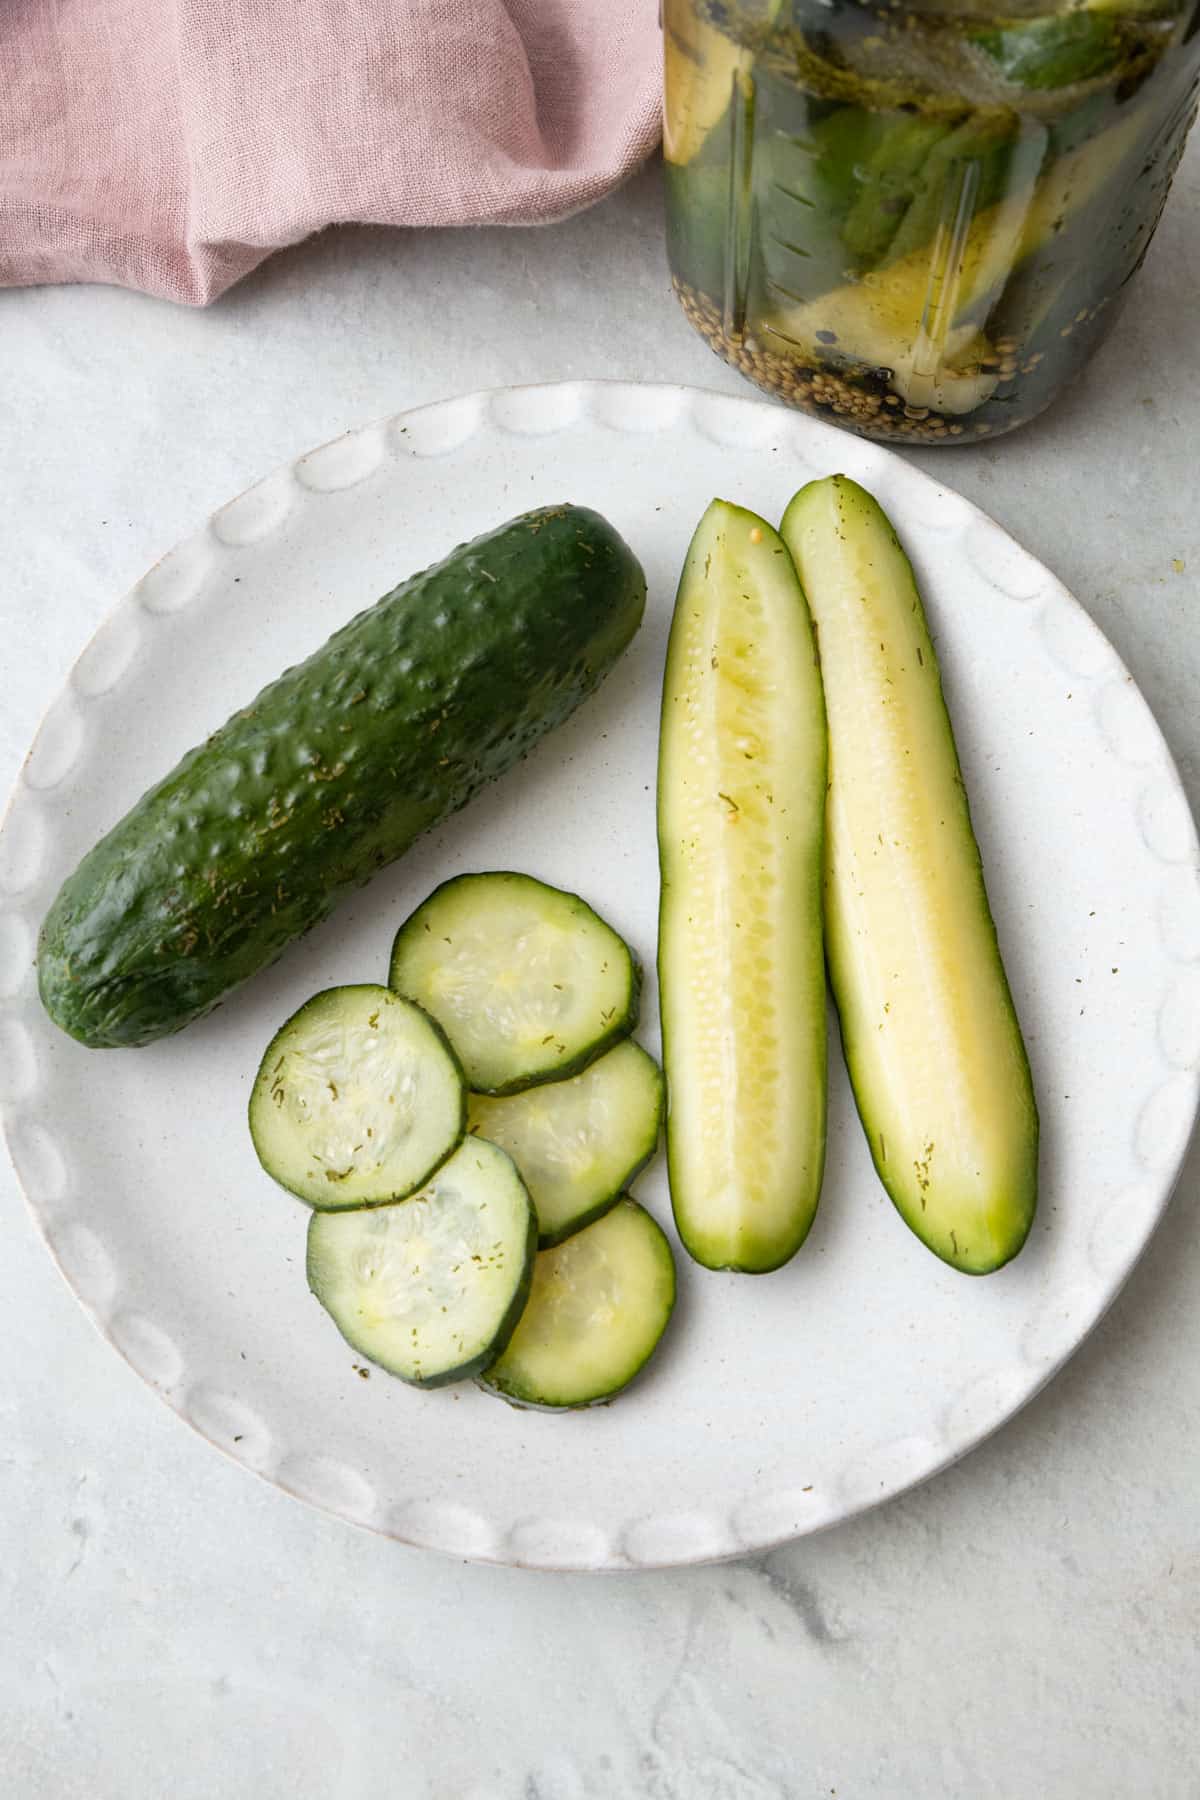 A few pickle spears, slices, and whole pickles on a plate with a pickle jar nearby.